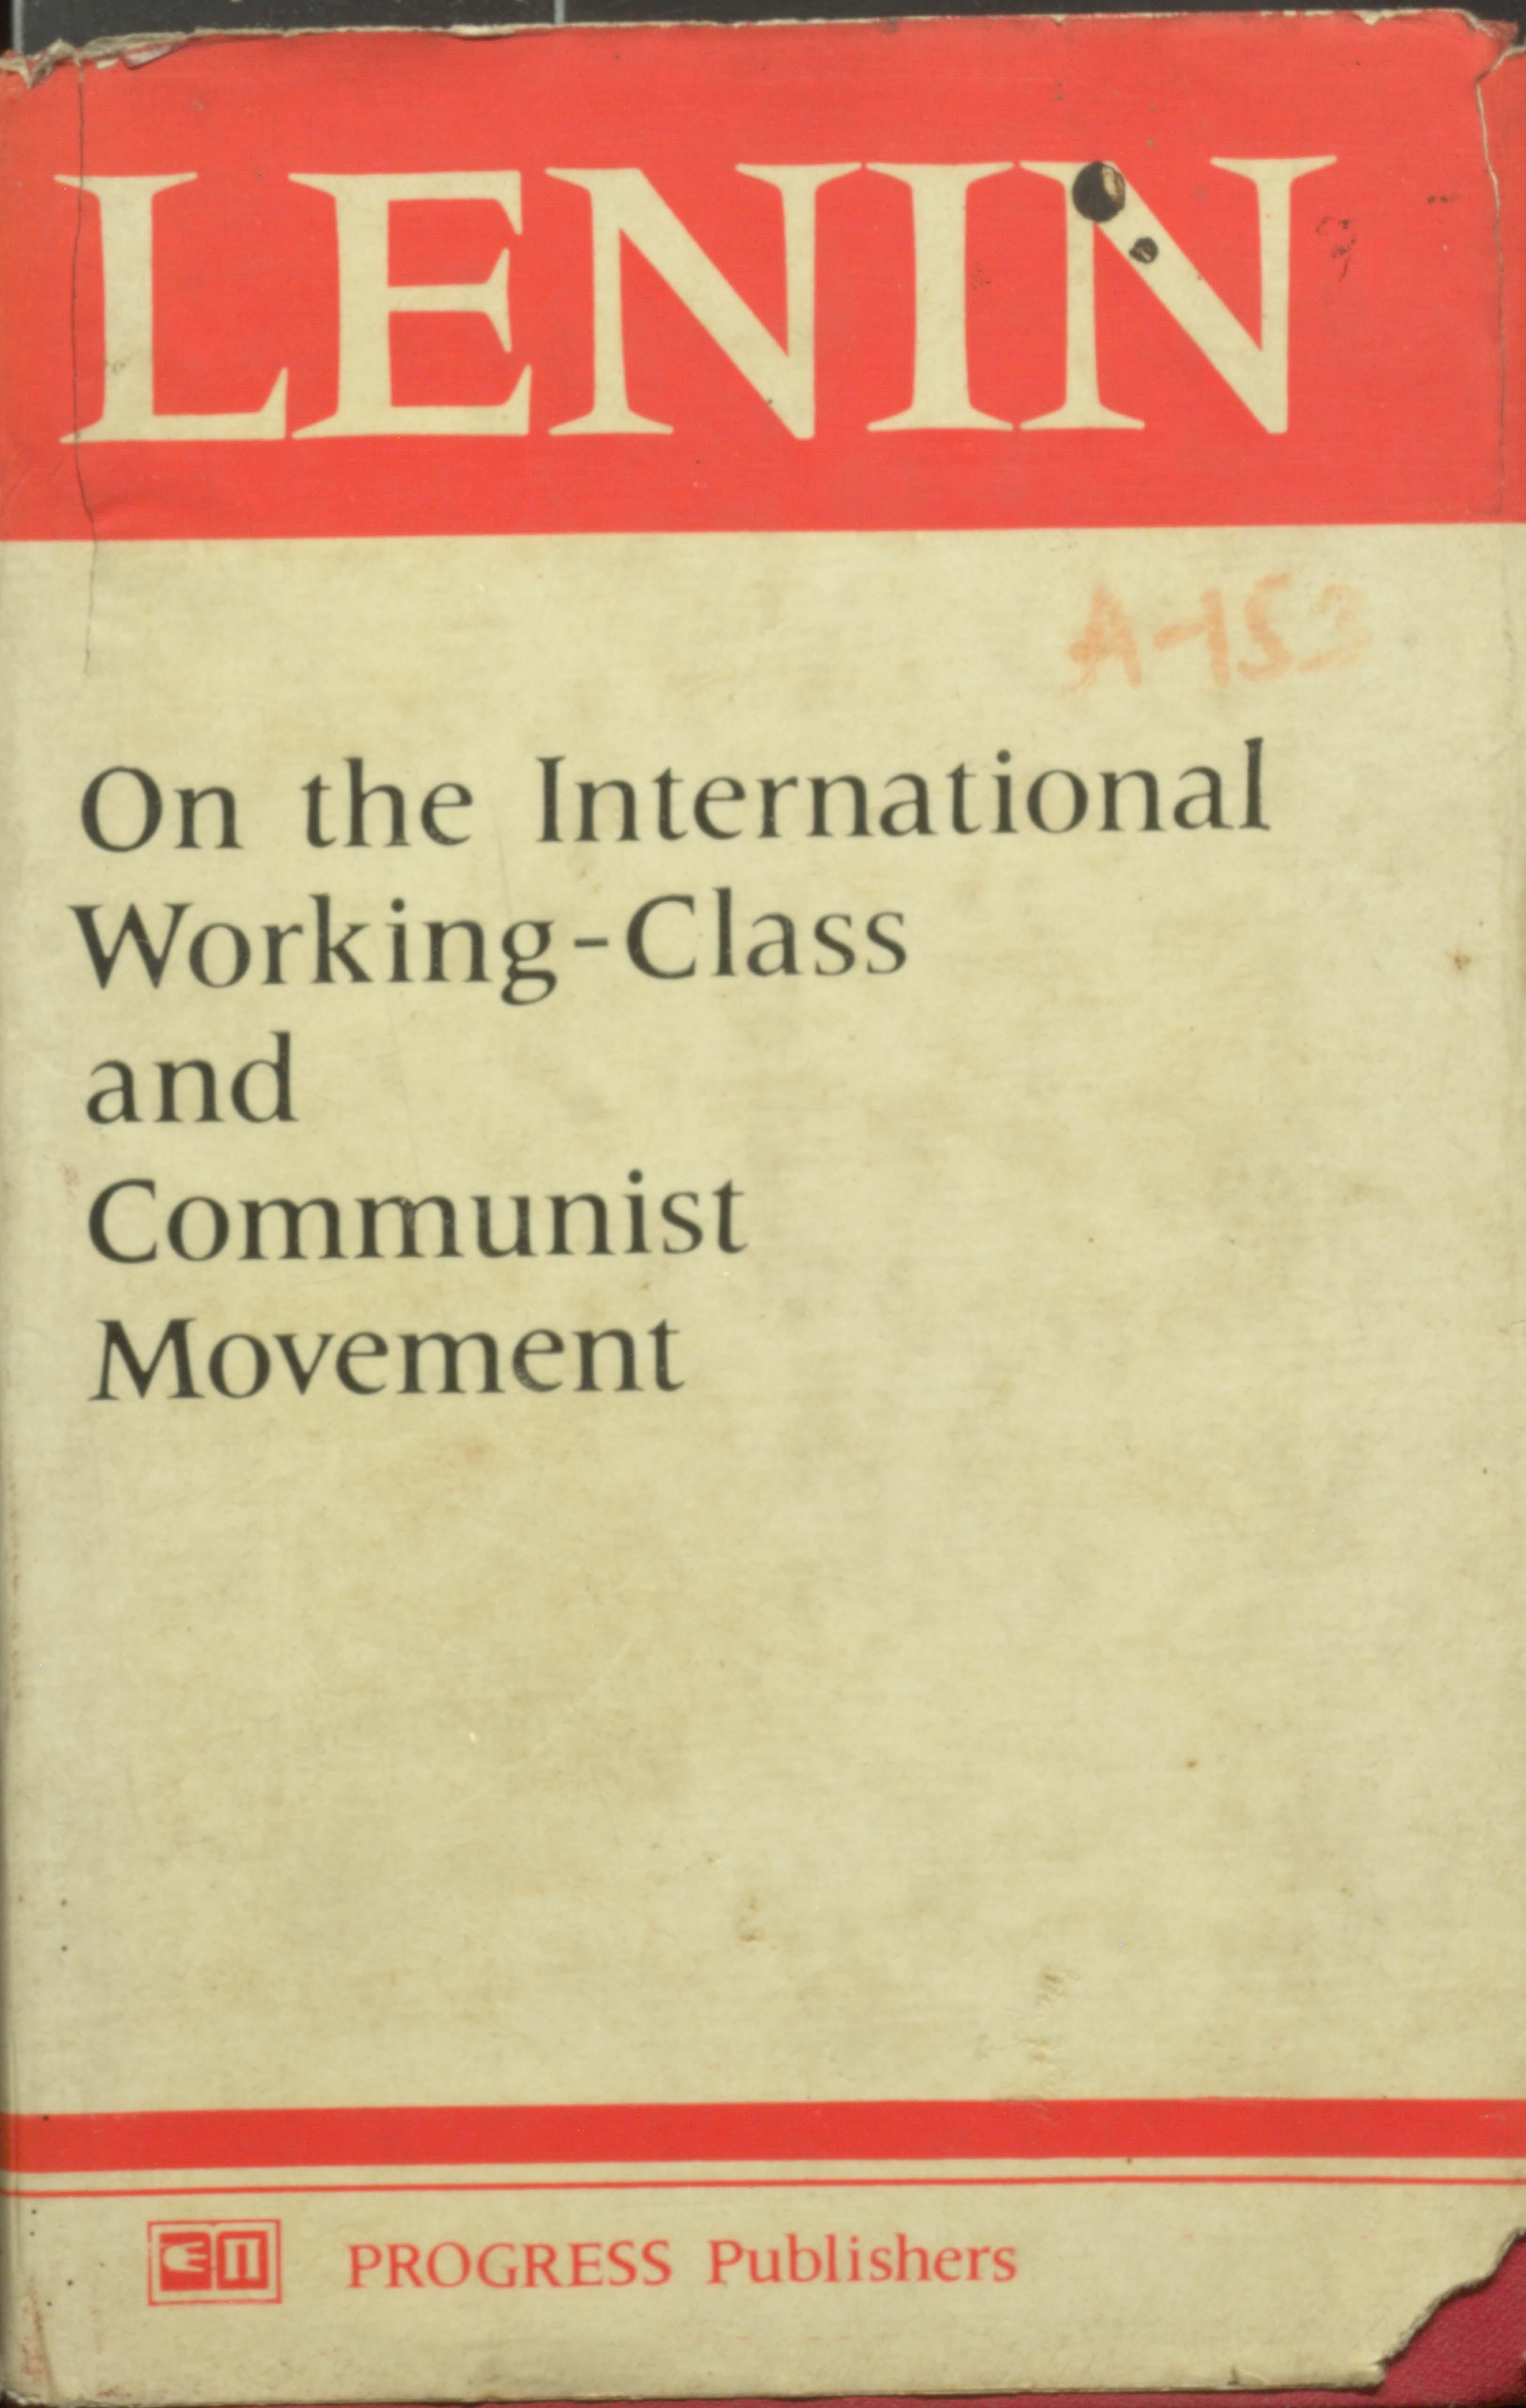 Lenin On the International Working-Class and Communist Movement